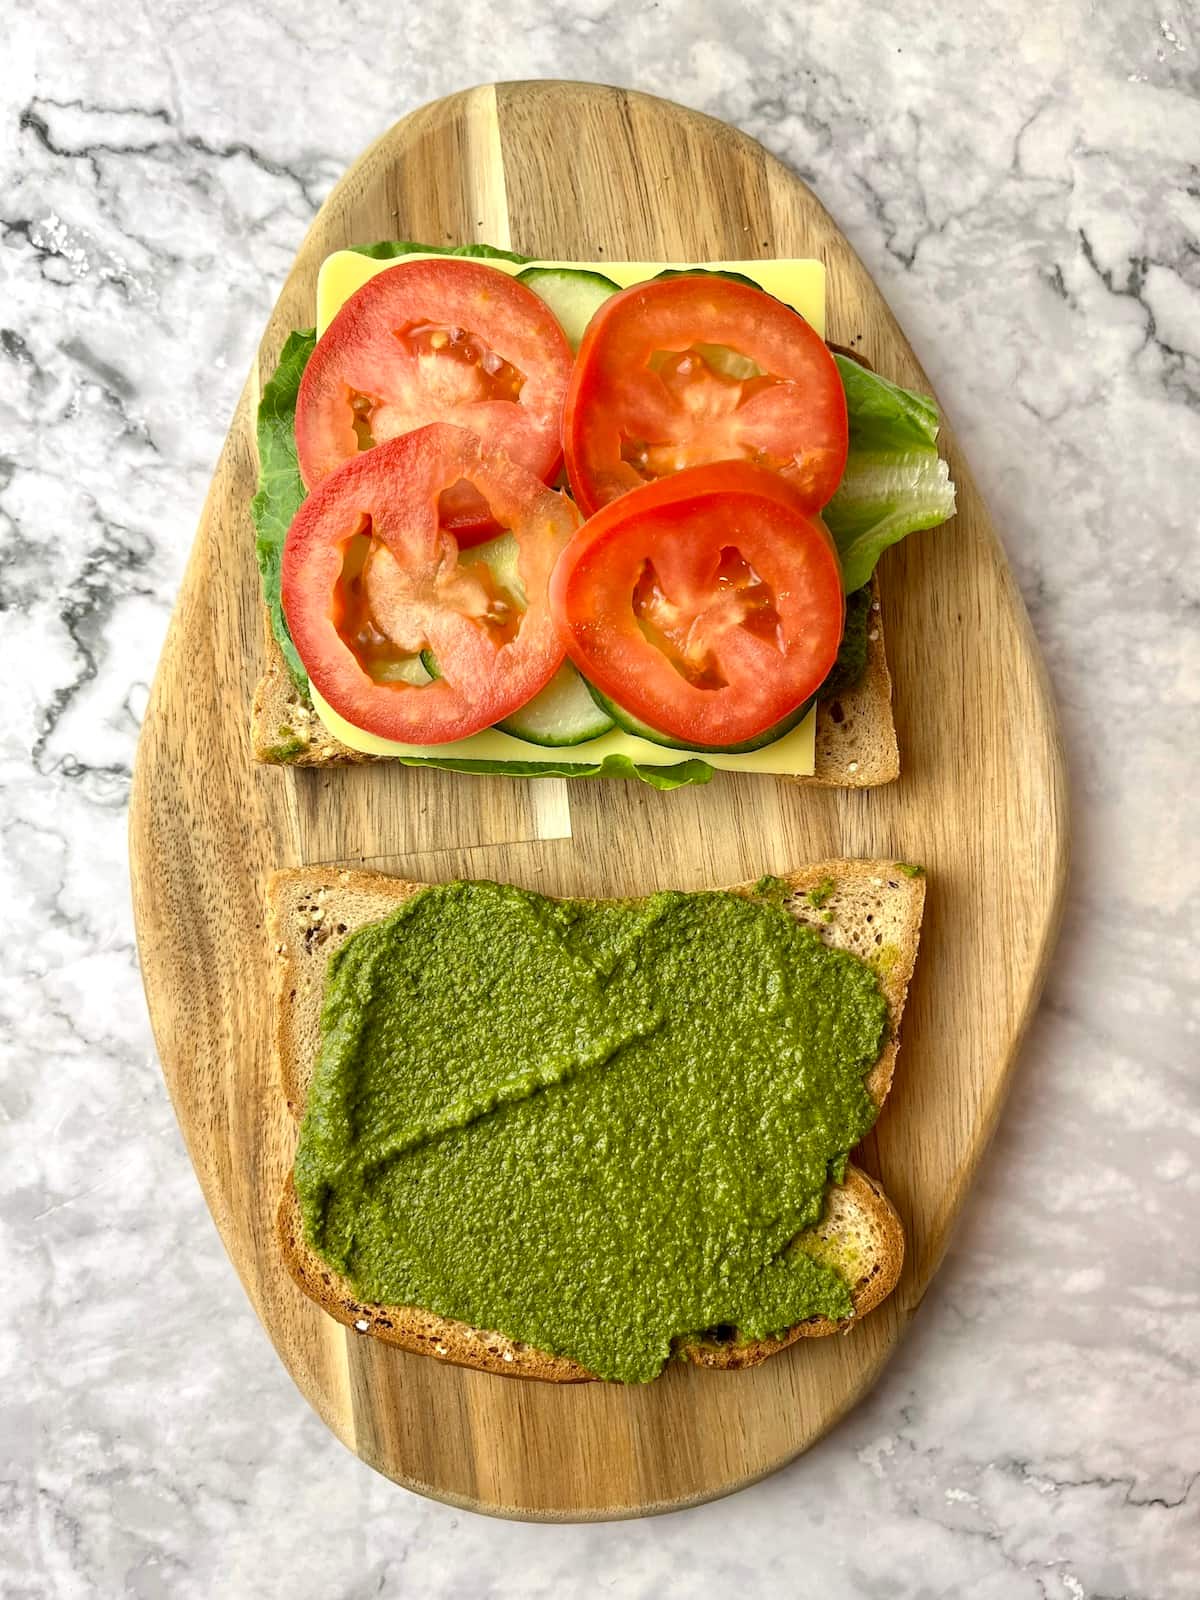 Two slices of bread, one with pesto, and the other with veggies with tomato slices on top.